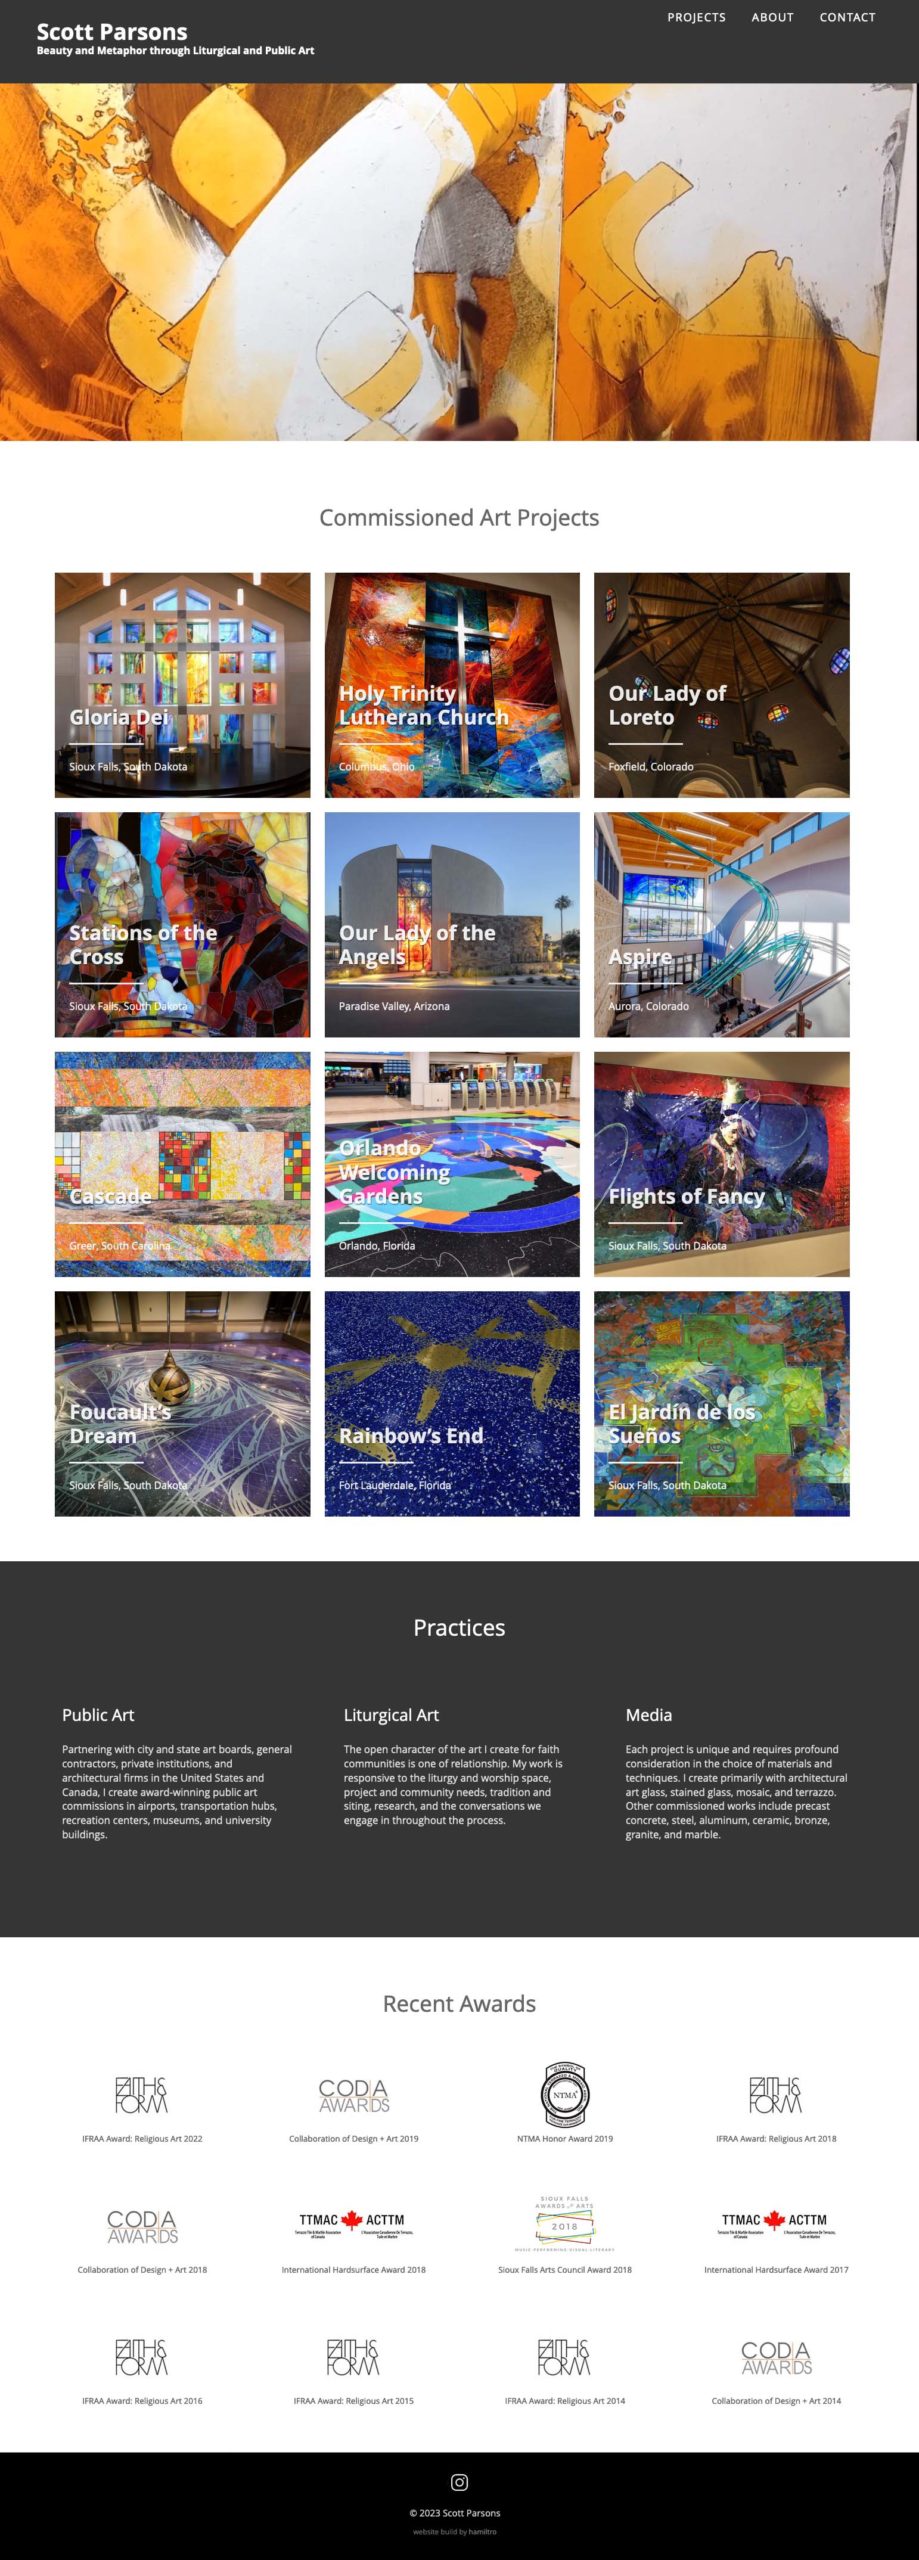 Website design for a stained glass artist in South Dakota. The long-scrolling homepage features a short full-cover video in the banner area, showing the process of creating a work of stained glass. Following sections provides thumbnail links to projects, descriptions of the artist's practices and icons from recent awards received.